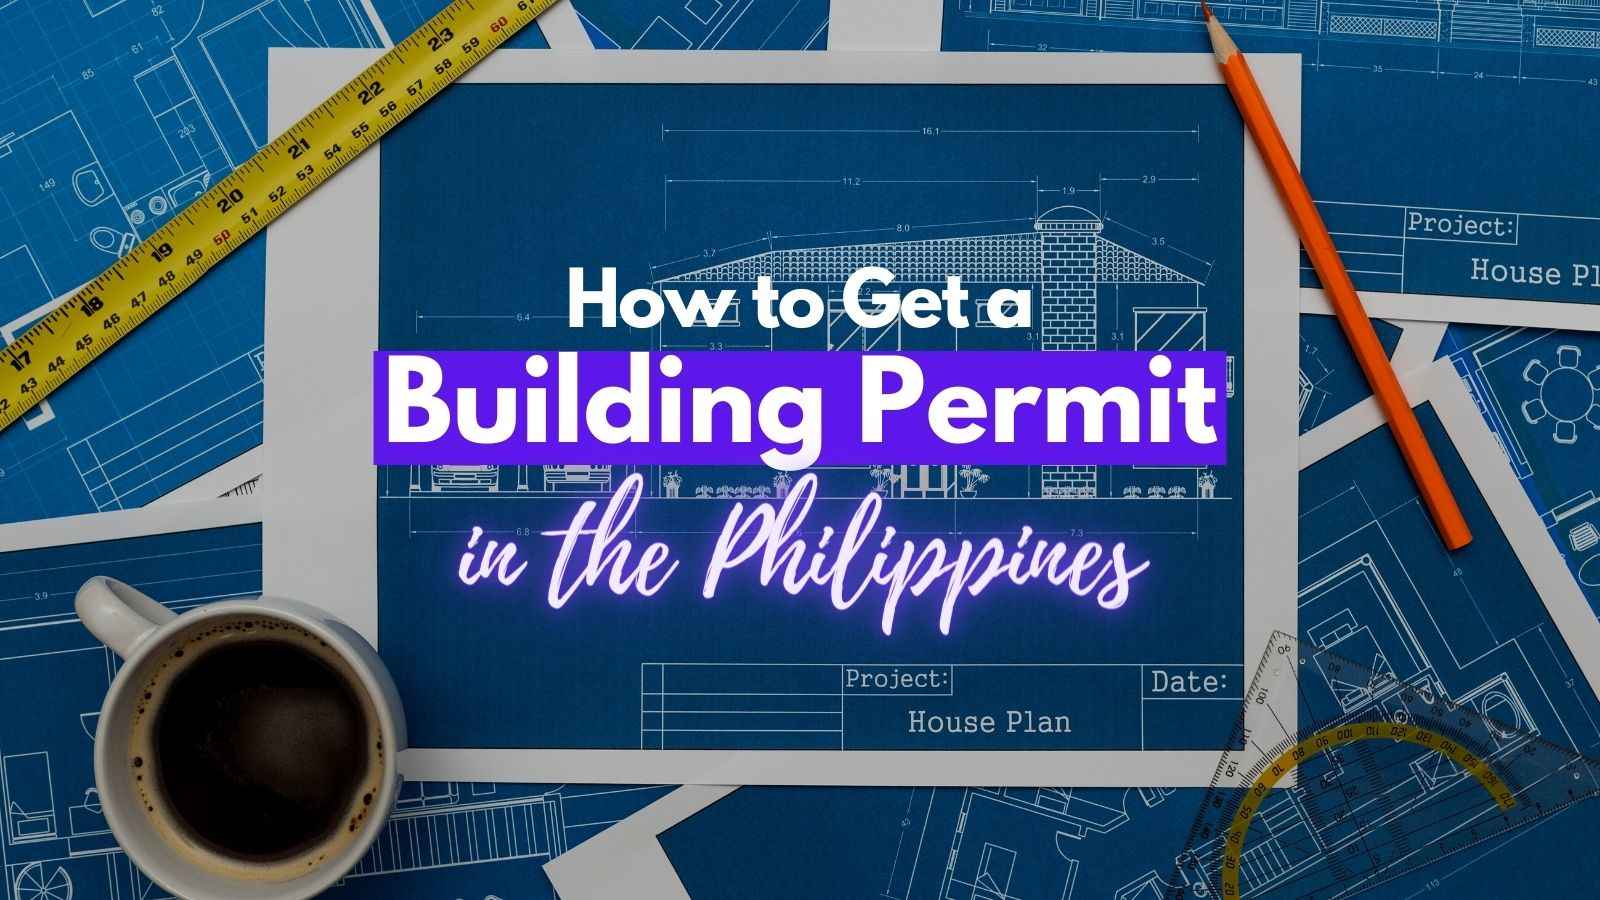 Building Permit Requirements, Fees, Application Forms and Procedure